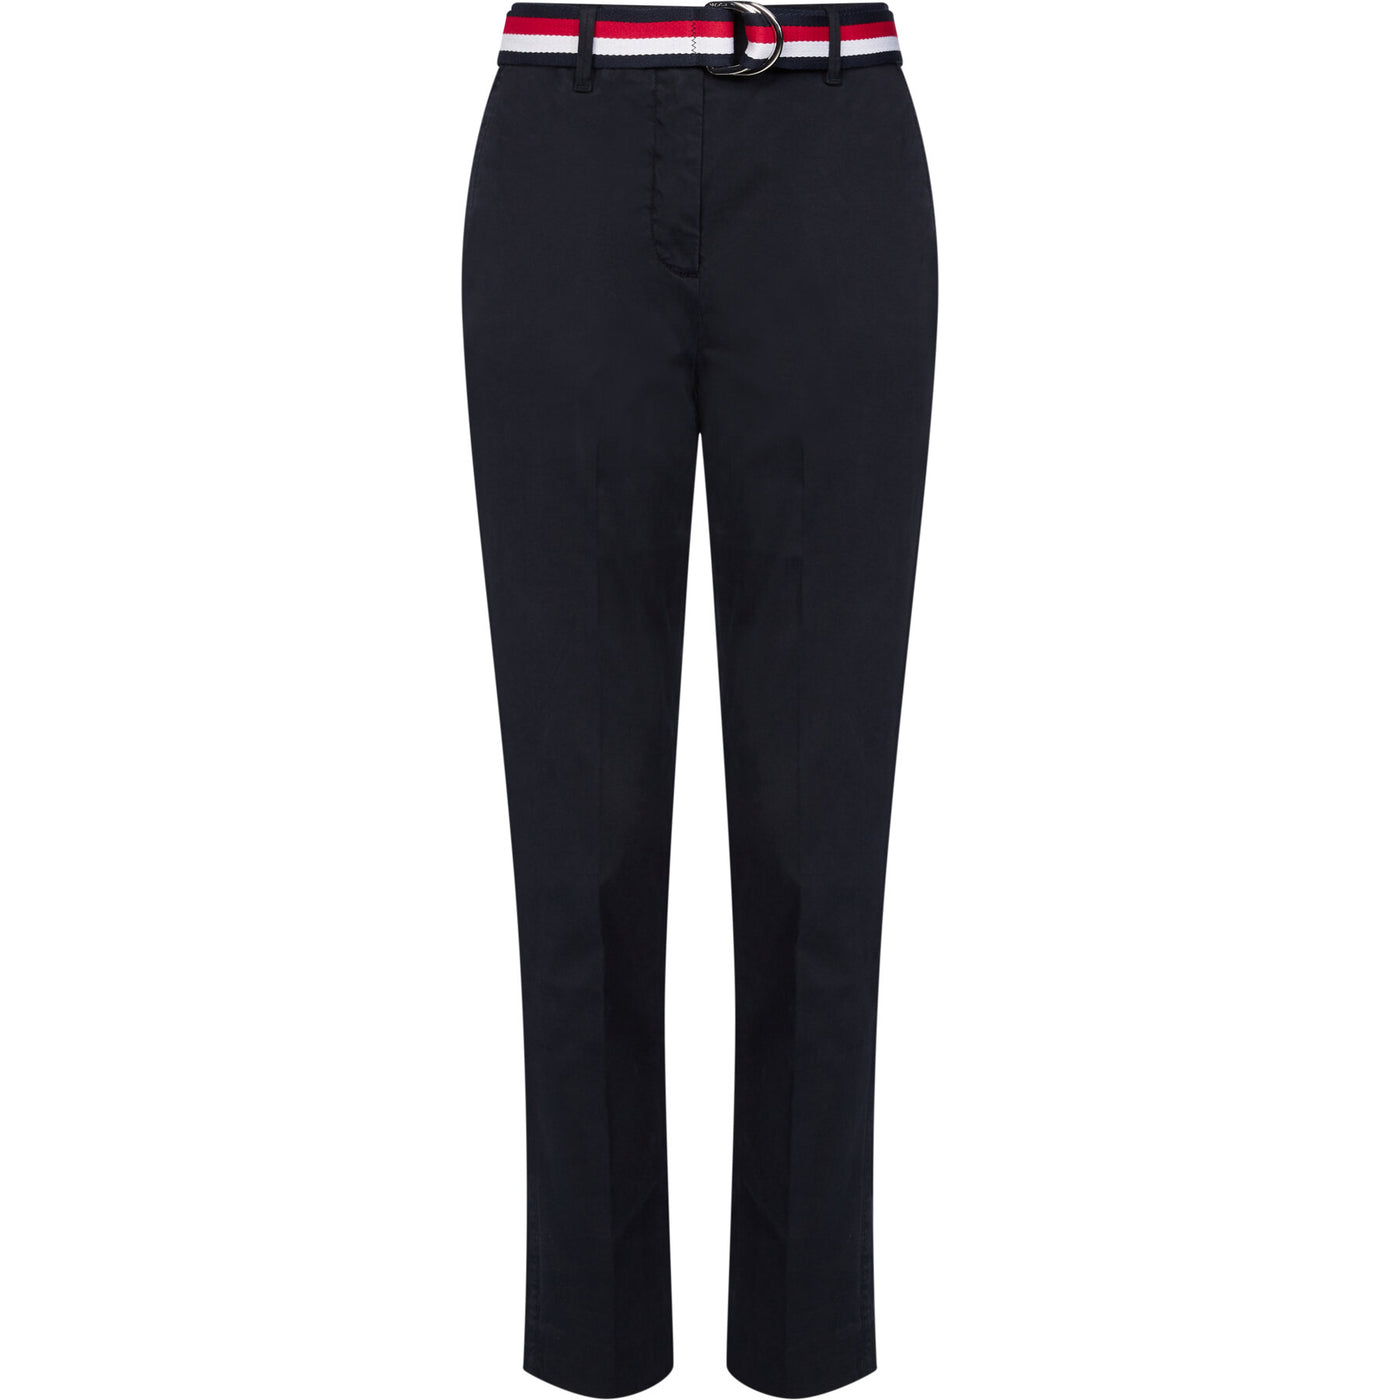 Women's trousers with accessory